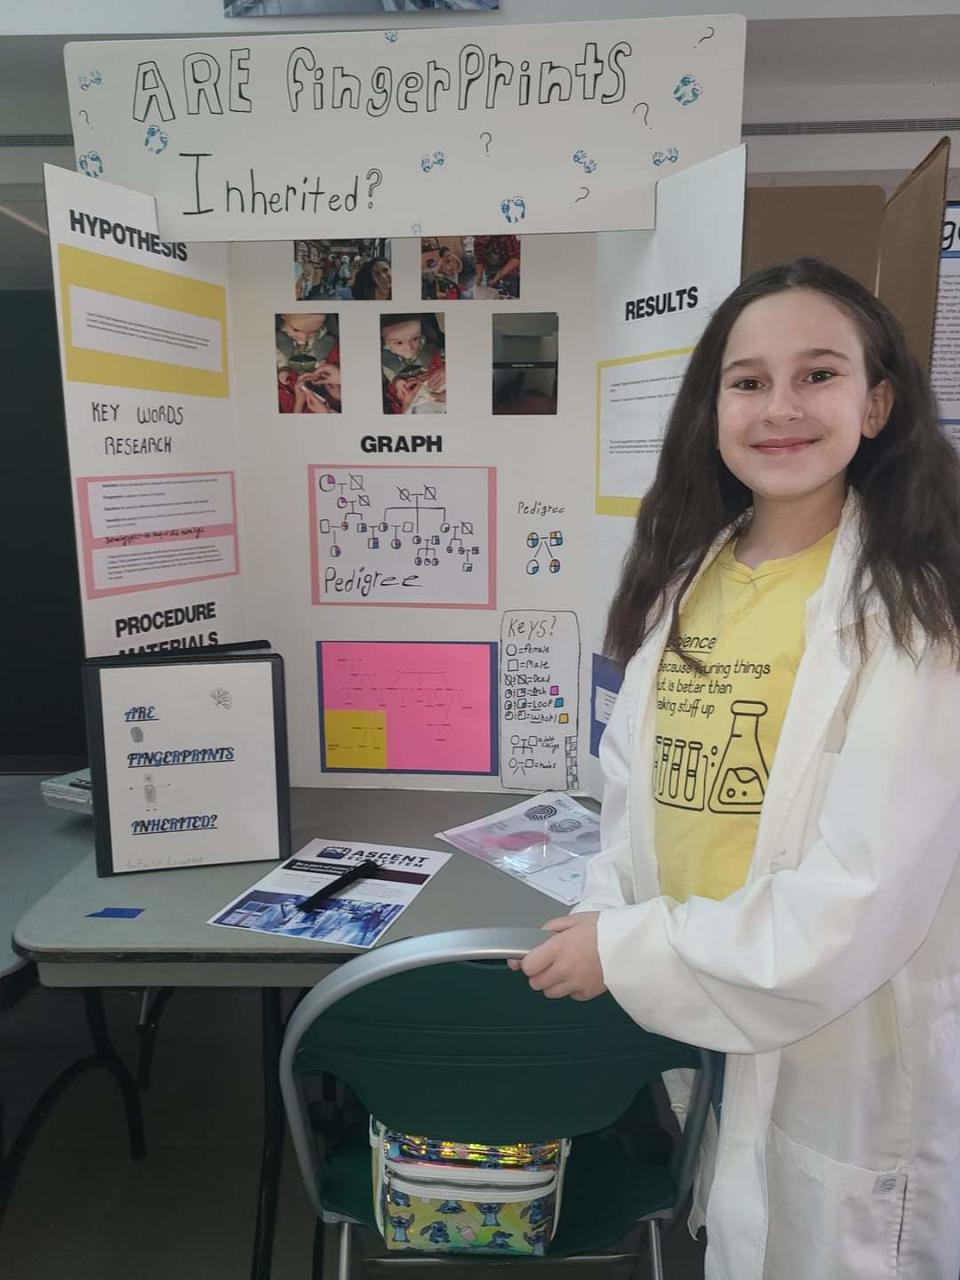 Unioto student Autumn Lemaster with her project "Are fingerprints inherited" that earned a superior rating at the Distirct 12 science fair.